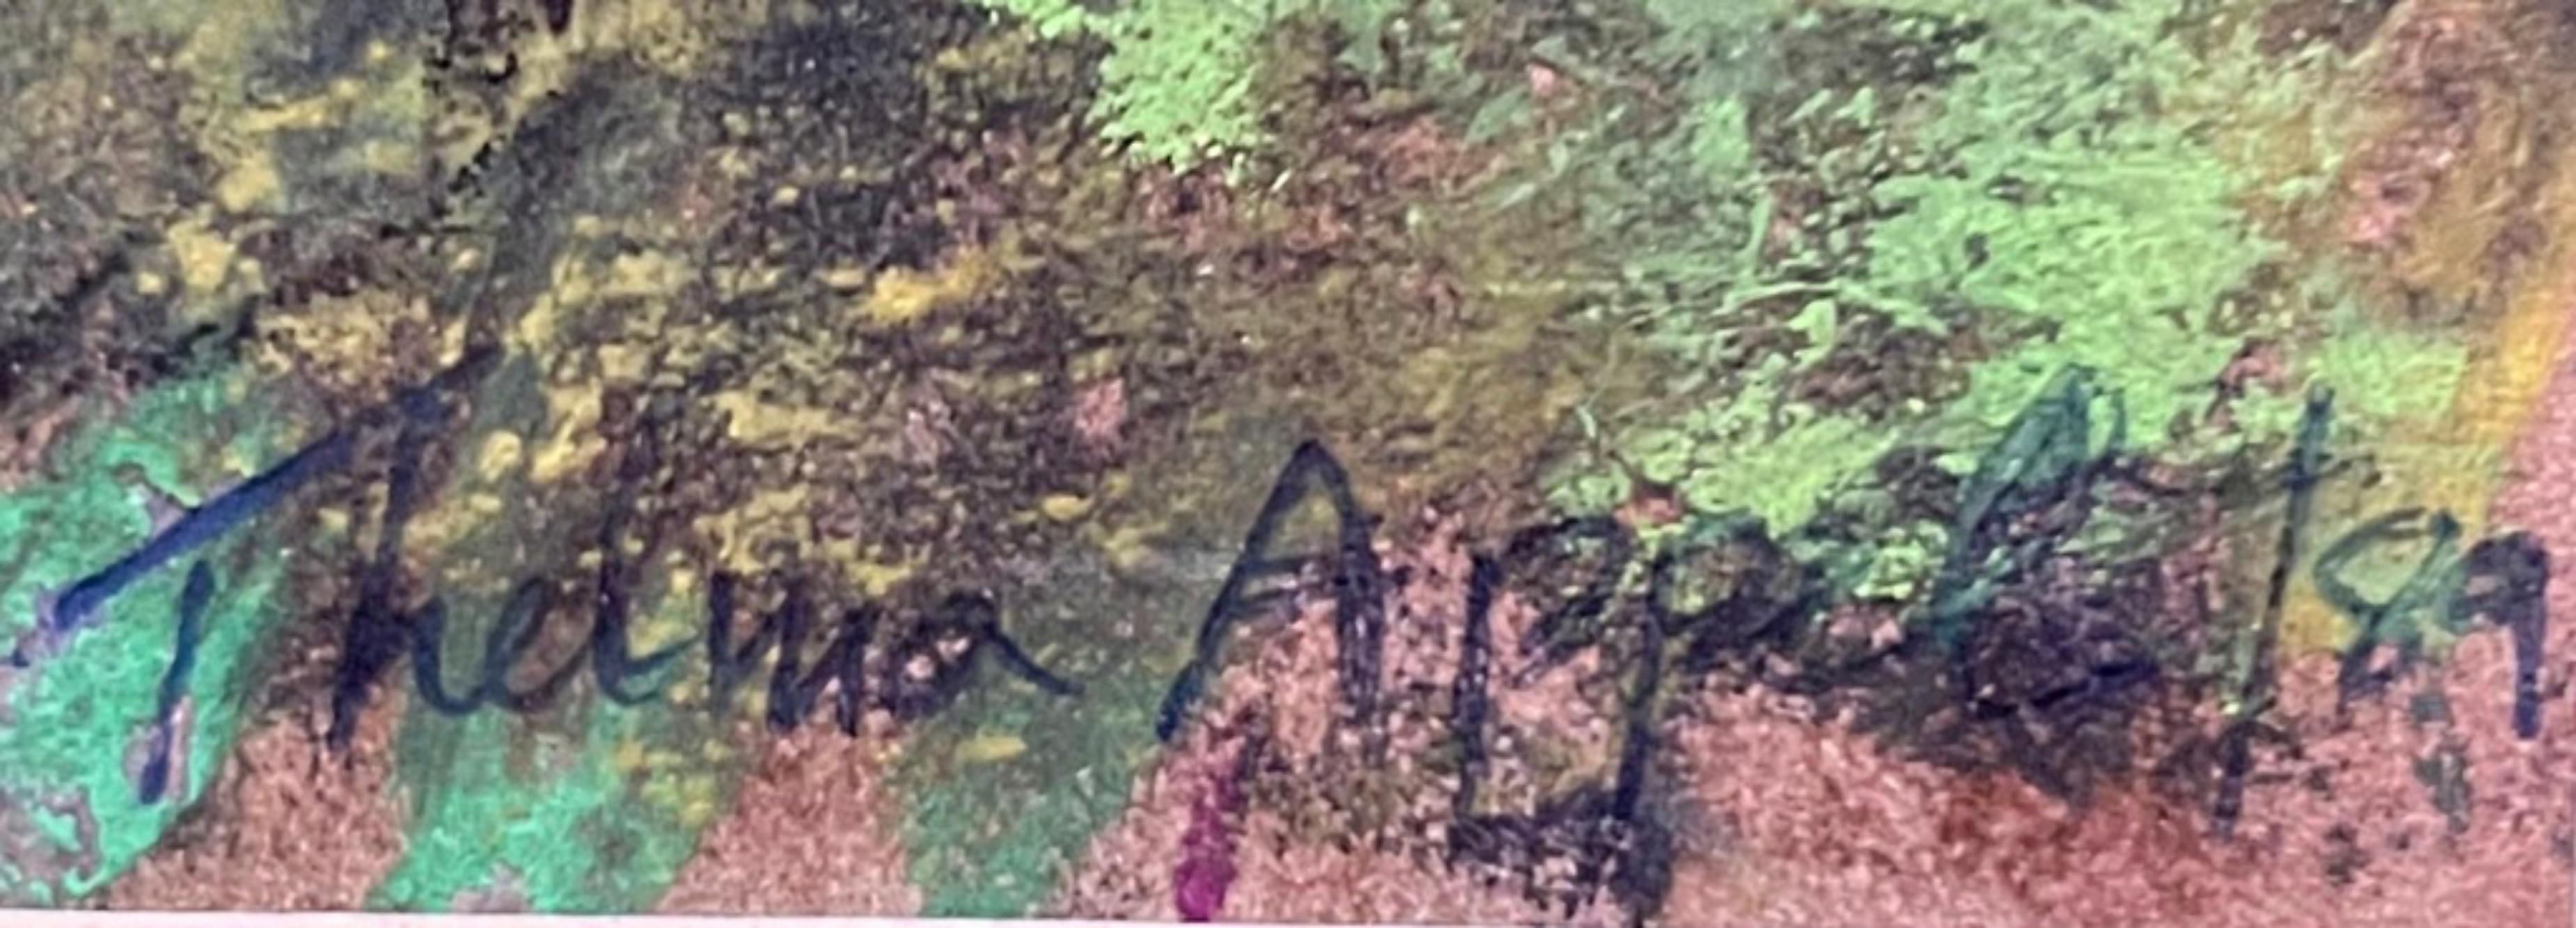 Untitled landscape close up  - Art by Thelma Appel